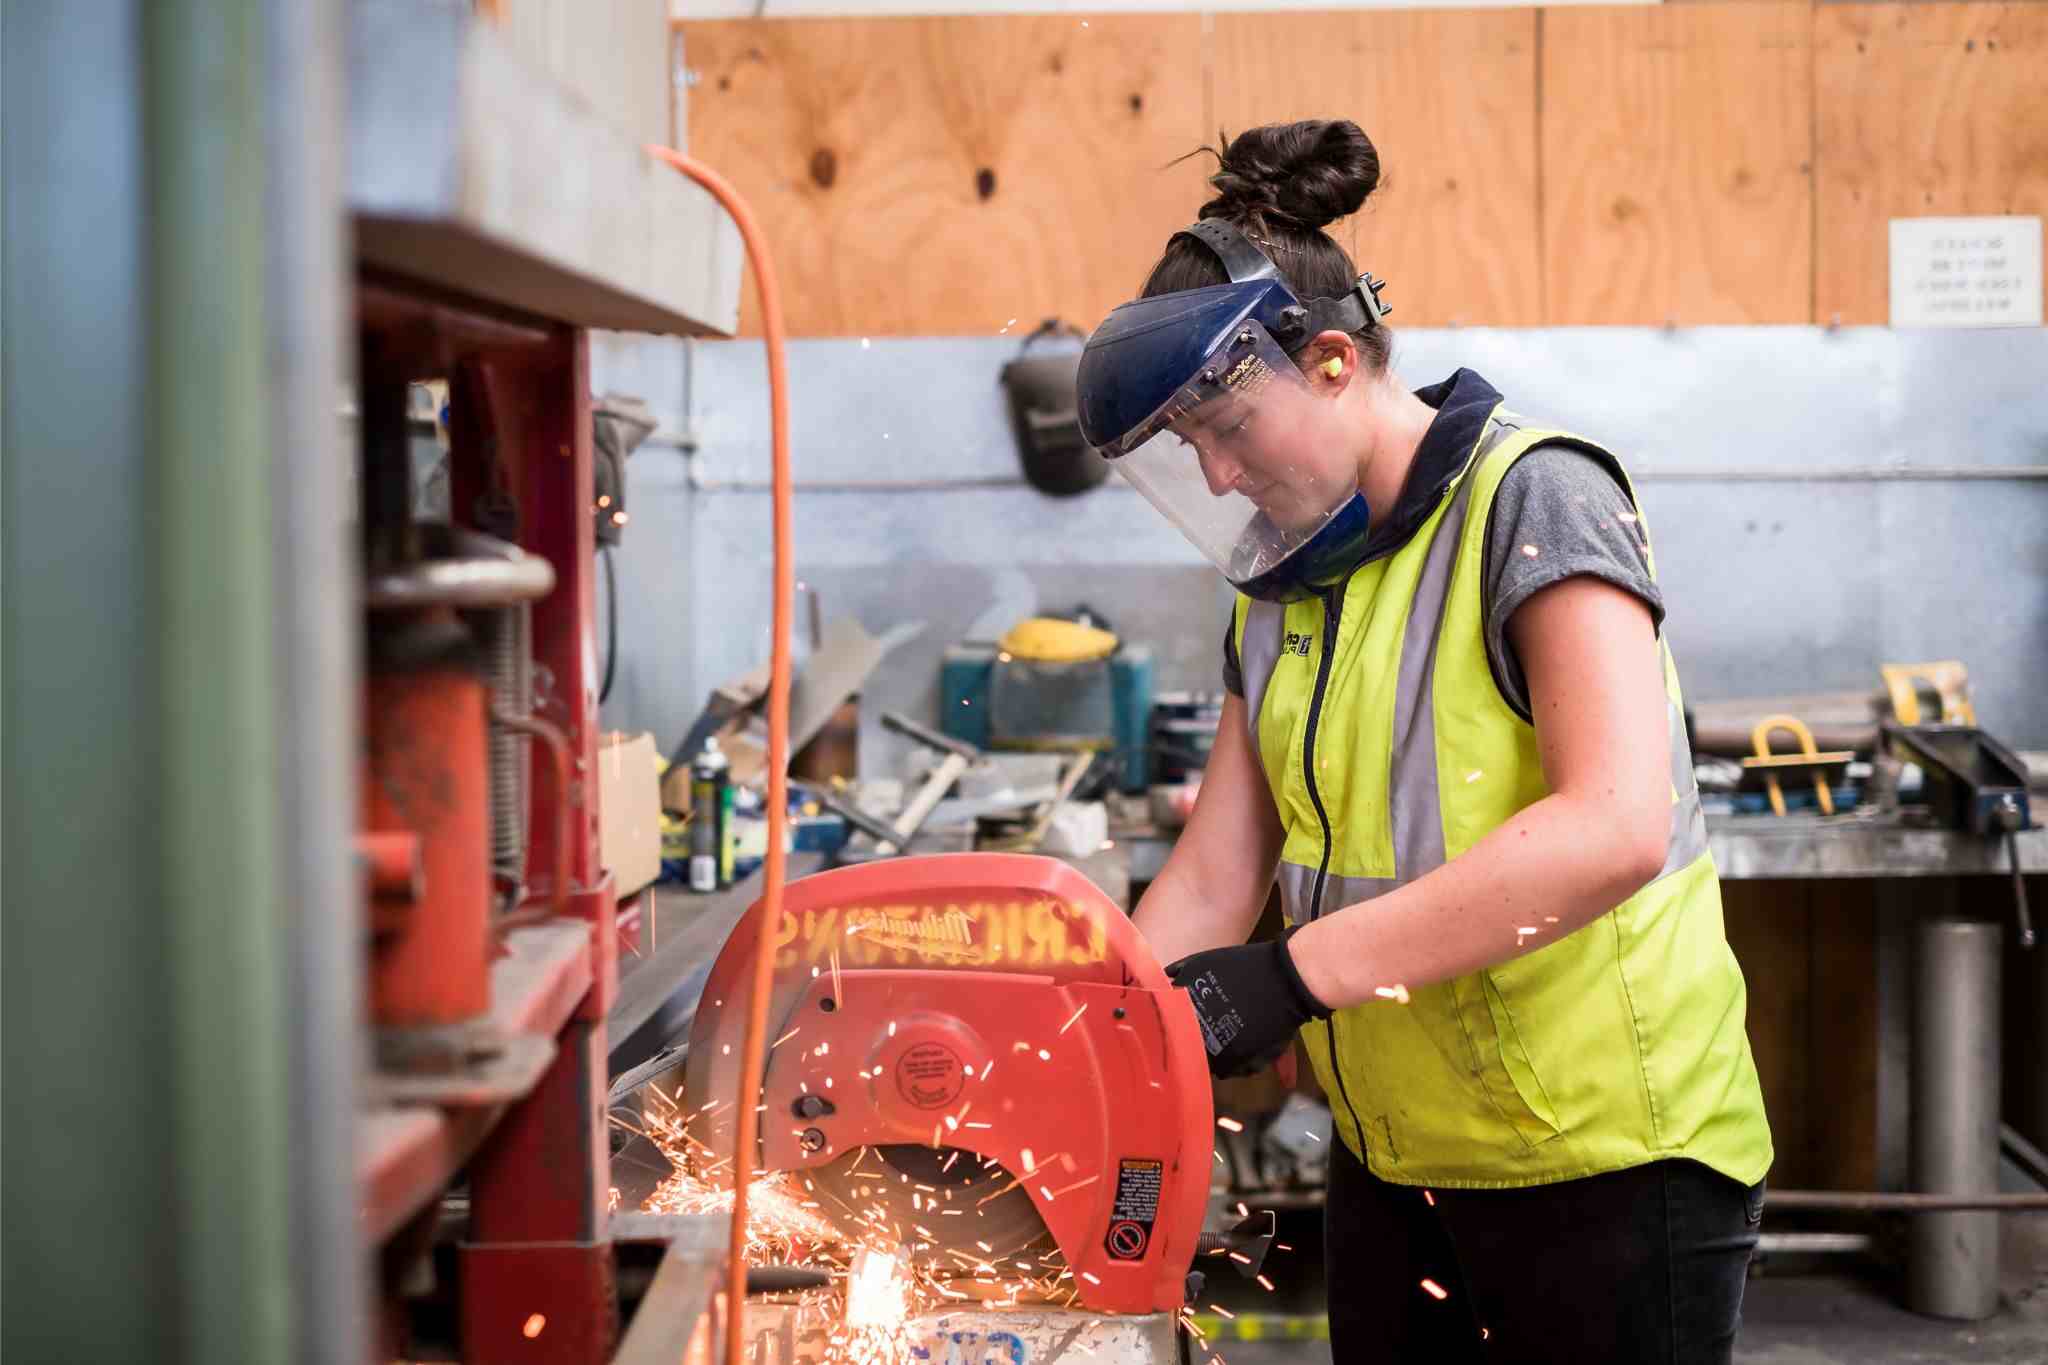 A woman at a workbench wearing protective equipment. She is working with a powered saw to cut materials.